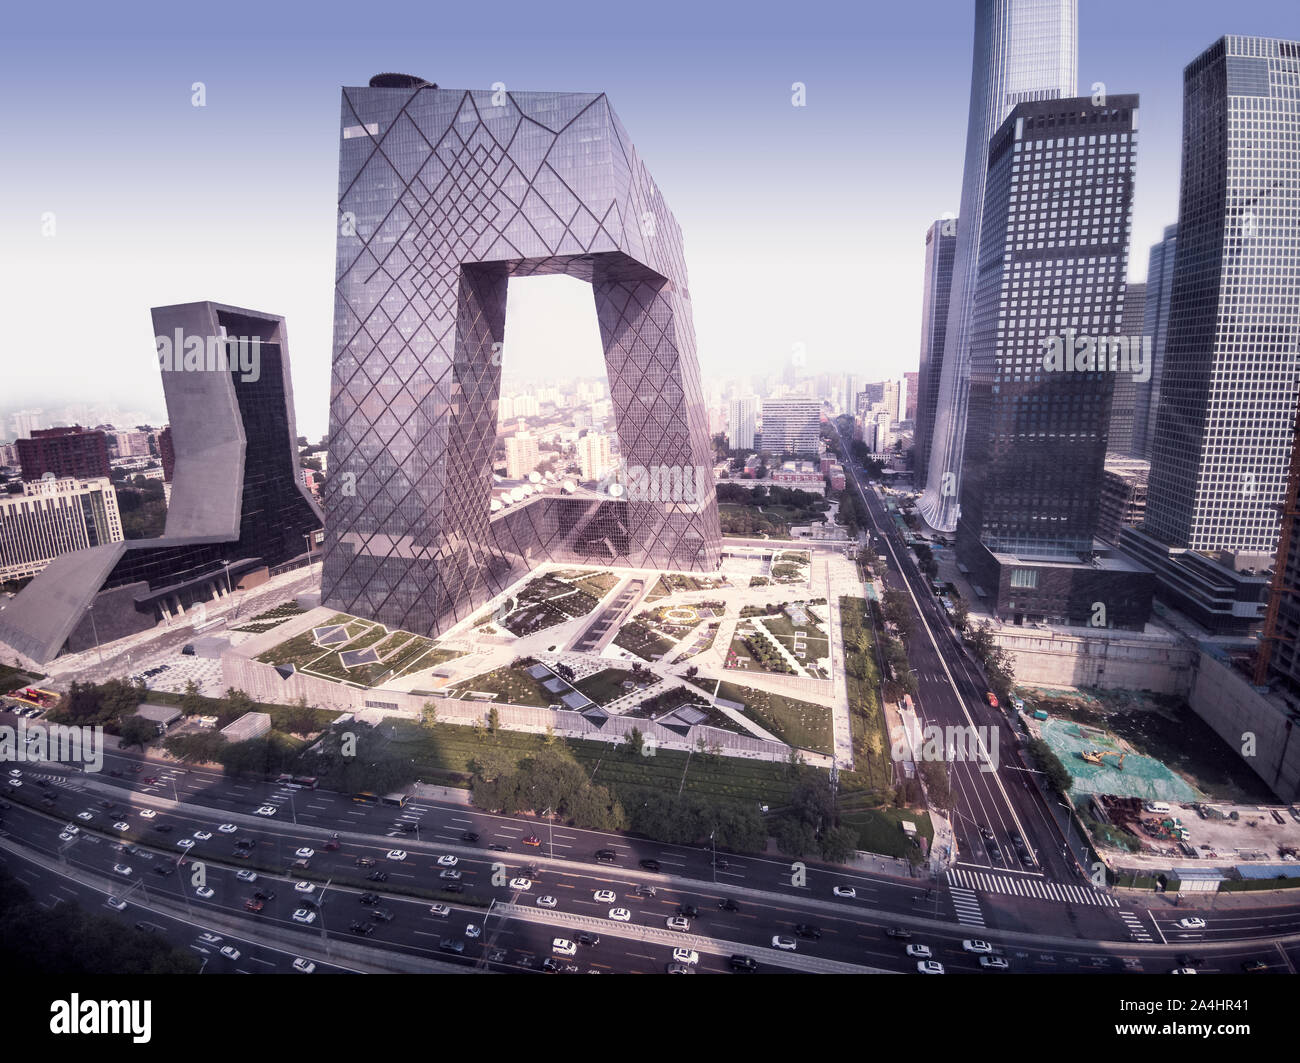 View of China Central Television (CCTV) building in CBD of Beijing Stock Photo